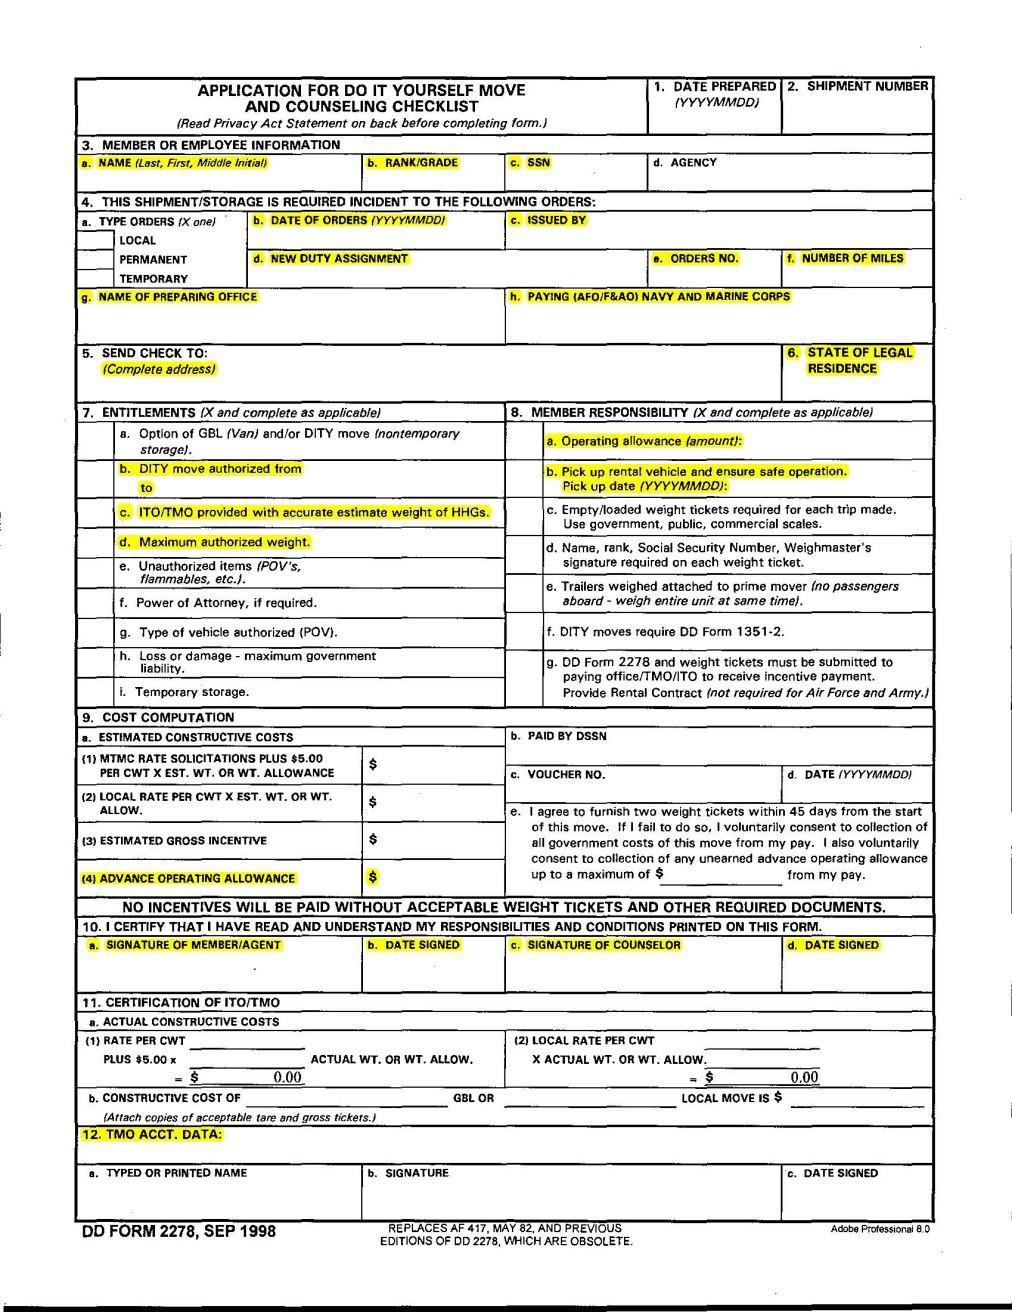 DD FORM 2278 Obtained via https://www.move.